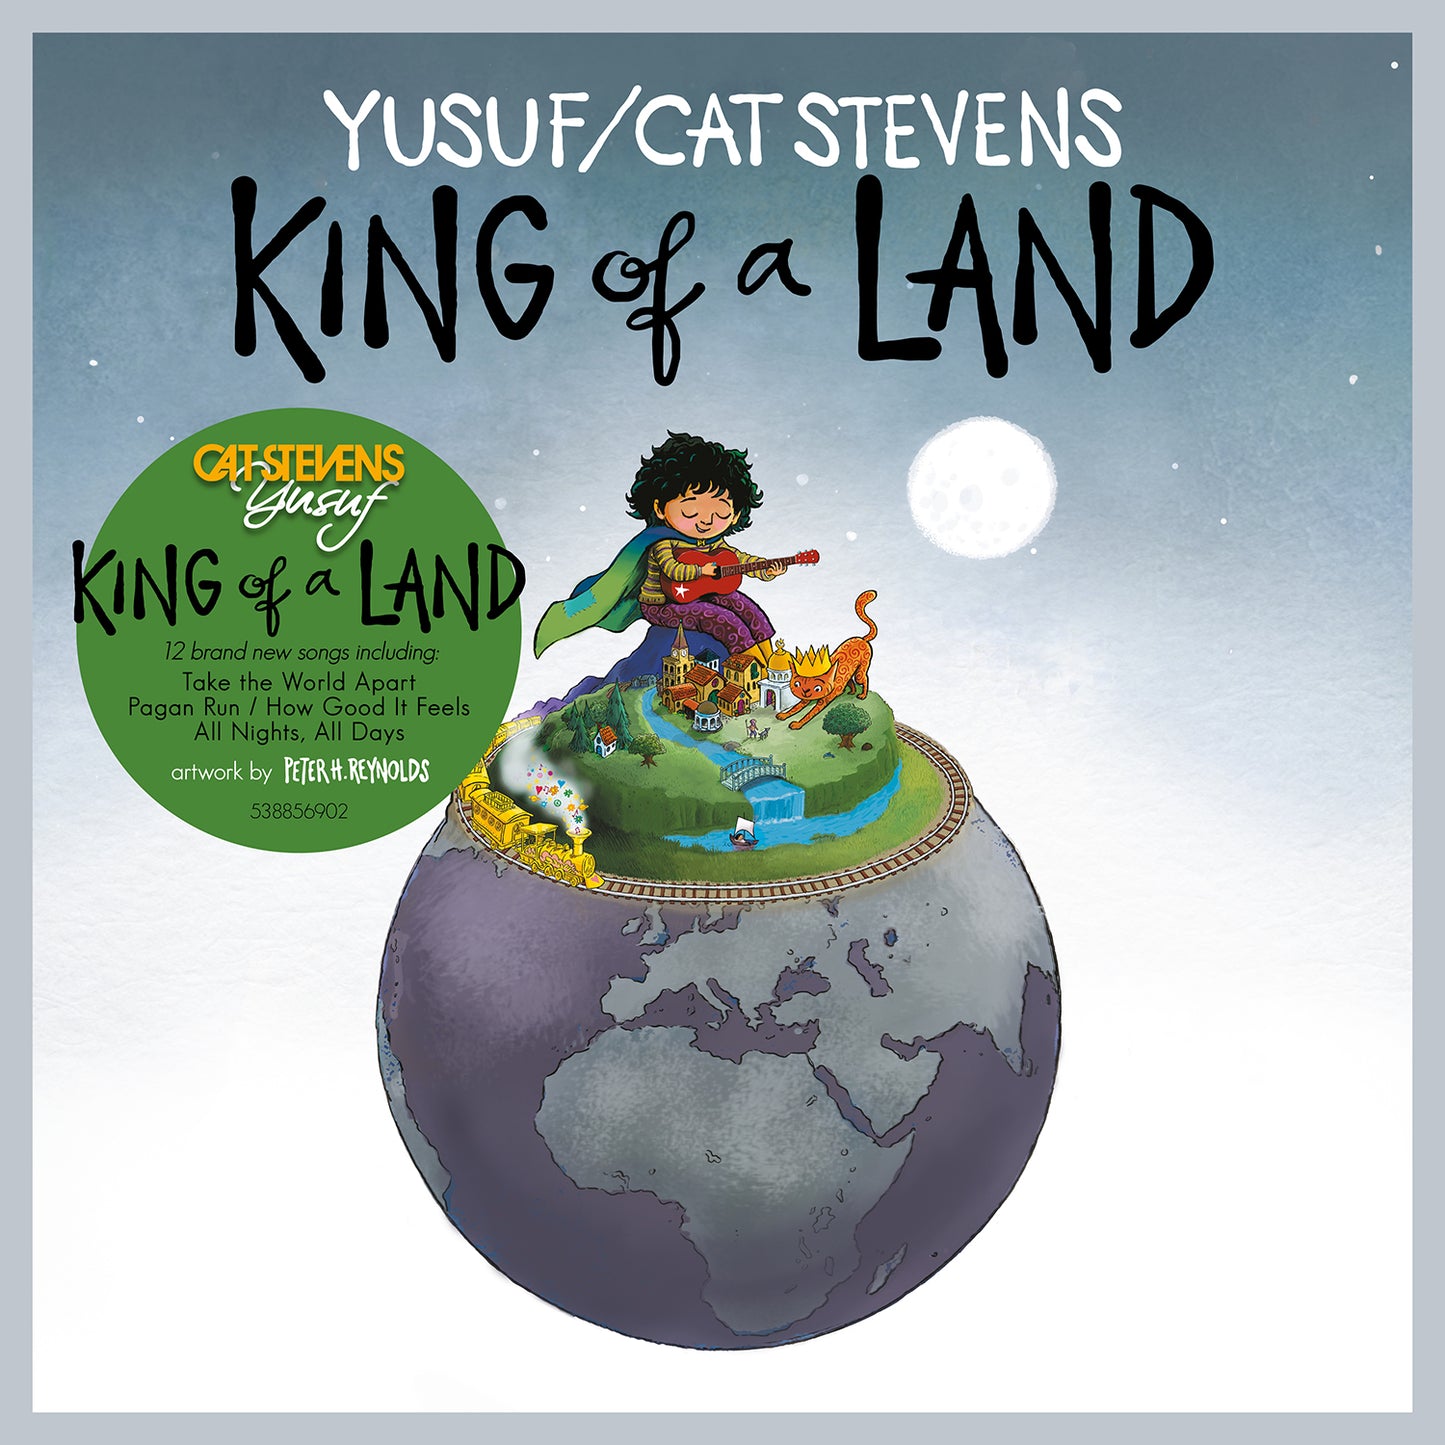 King of a Land (CD)